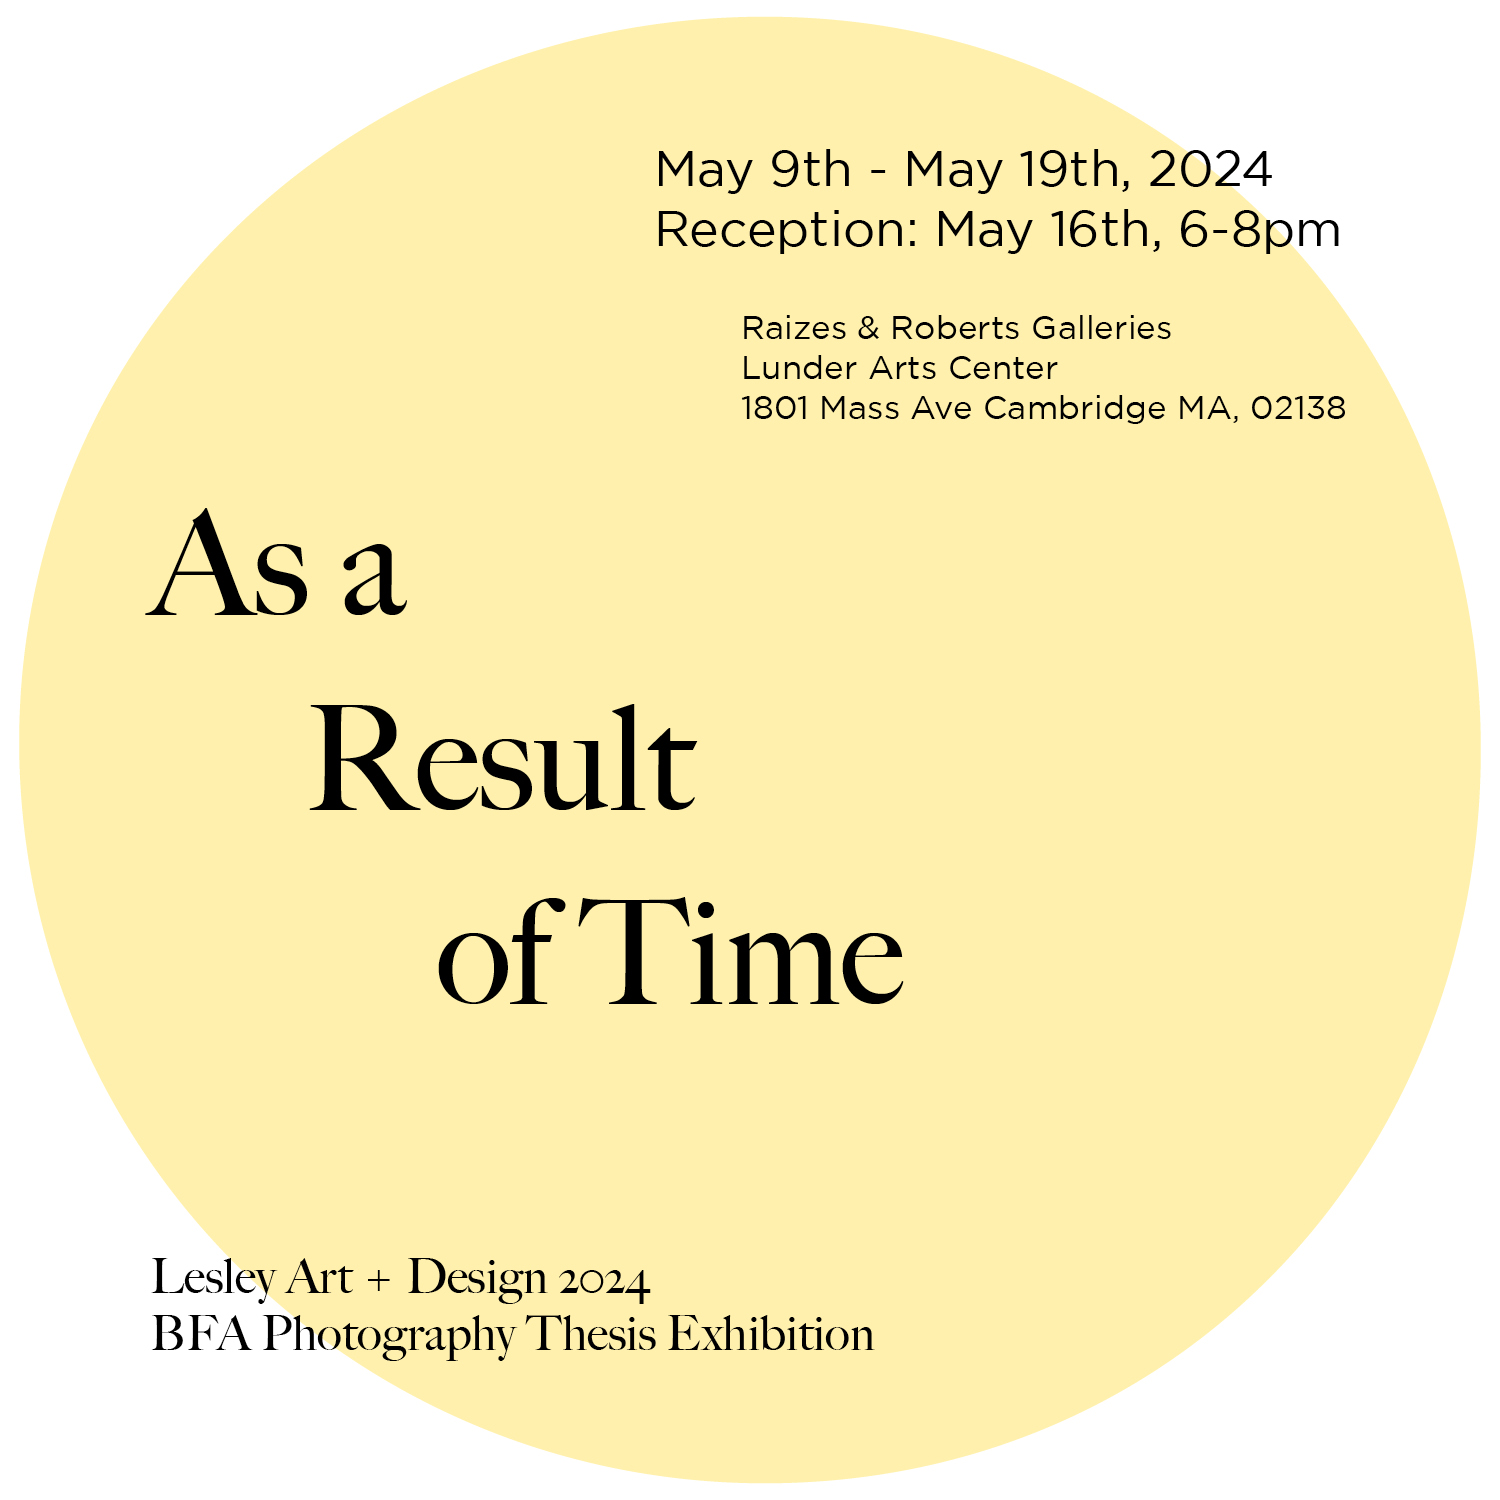 A pale yellow circle on a white background. Over the circle are the words "As a Result of Time: Lesley Art + Design 2024 BFA Photography Thesis Exhibition" in black text. 